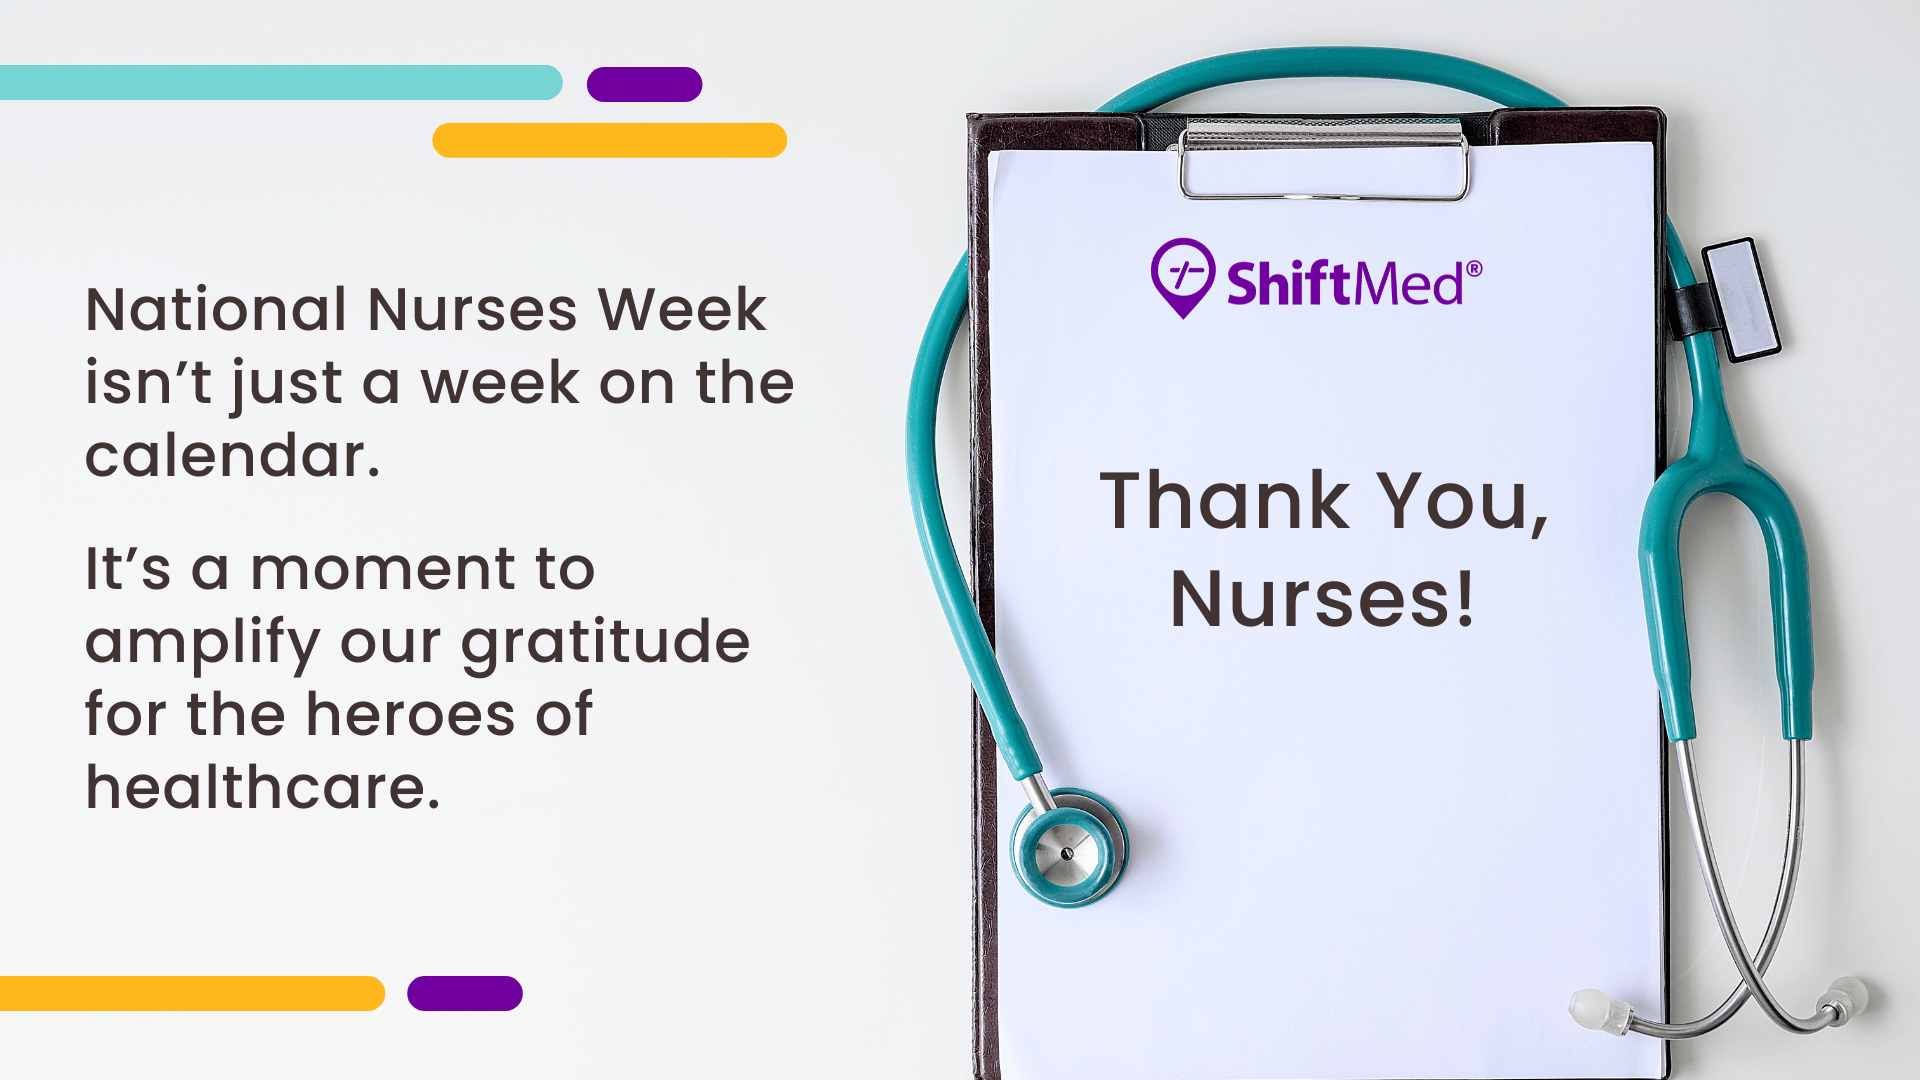 An image of a clipboard and stethoscope with text that says Thank You, Nurses! in celebration of National Nurses Week.